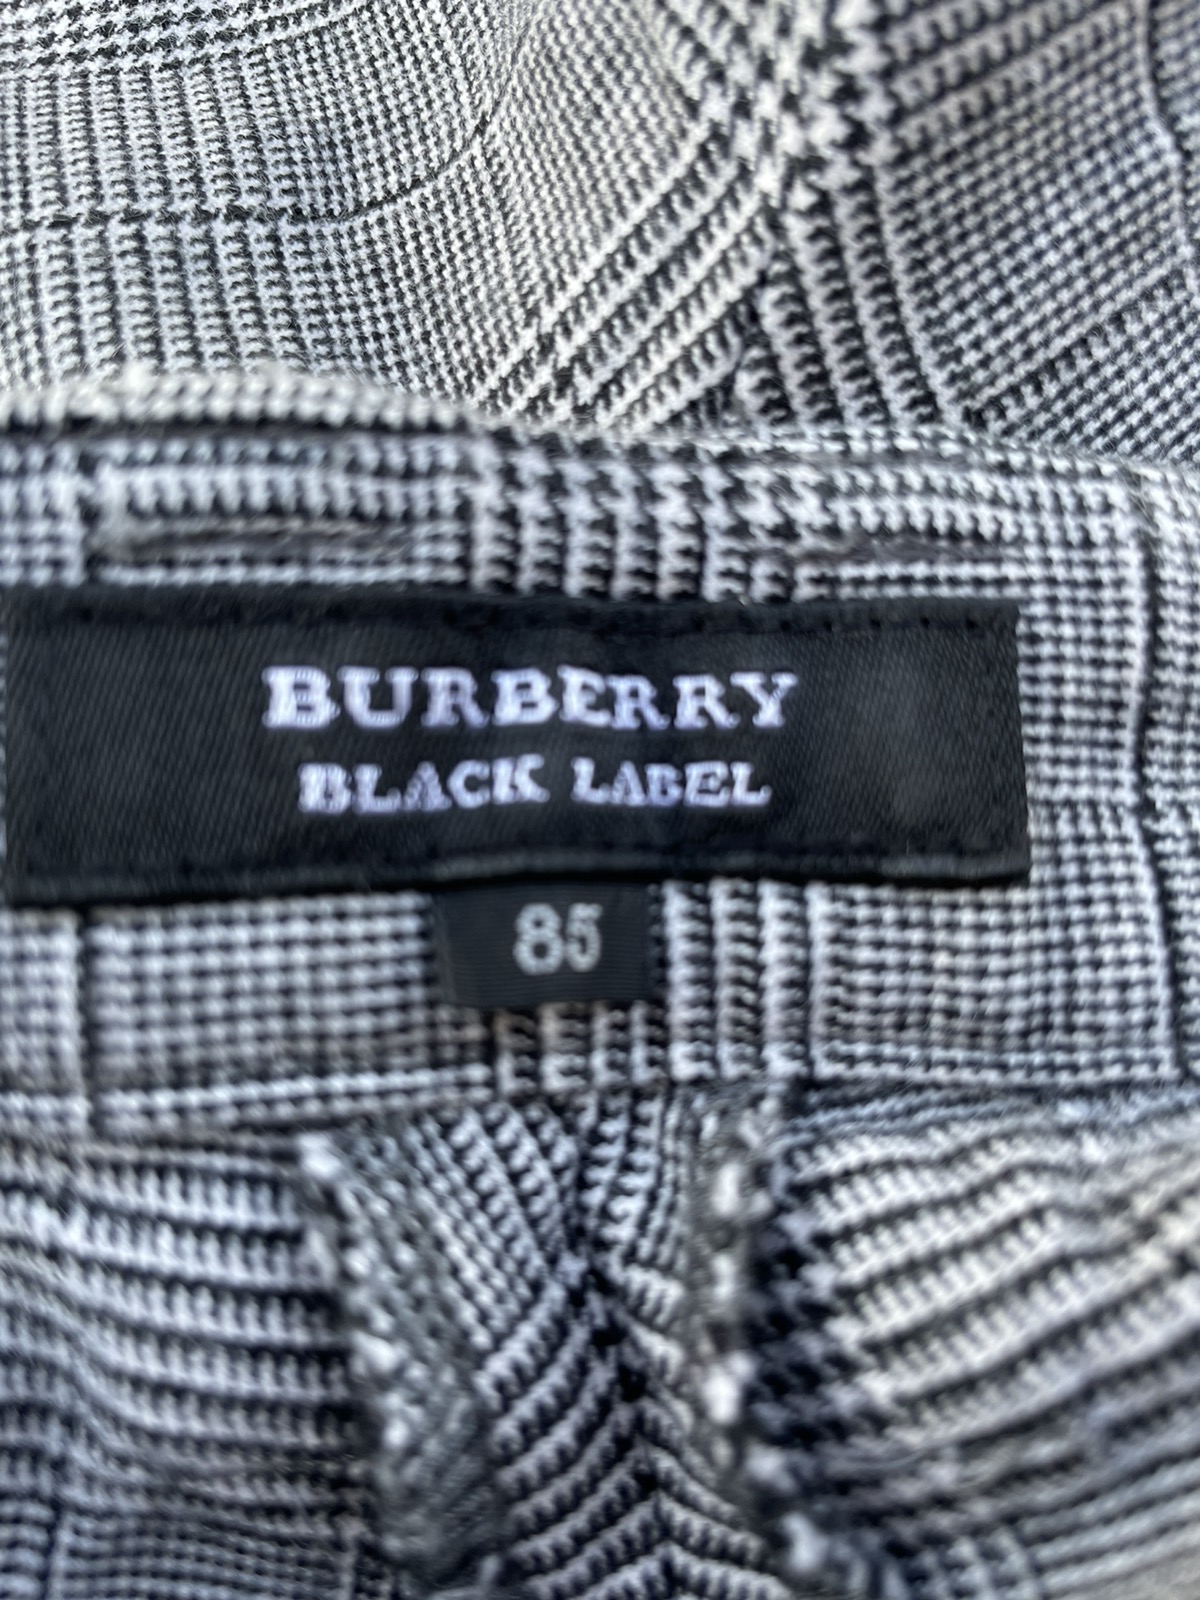 Burberry Black Label Checked Pants